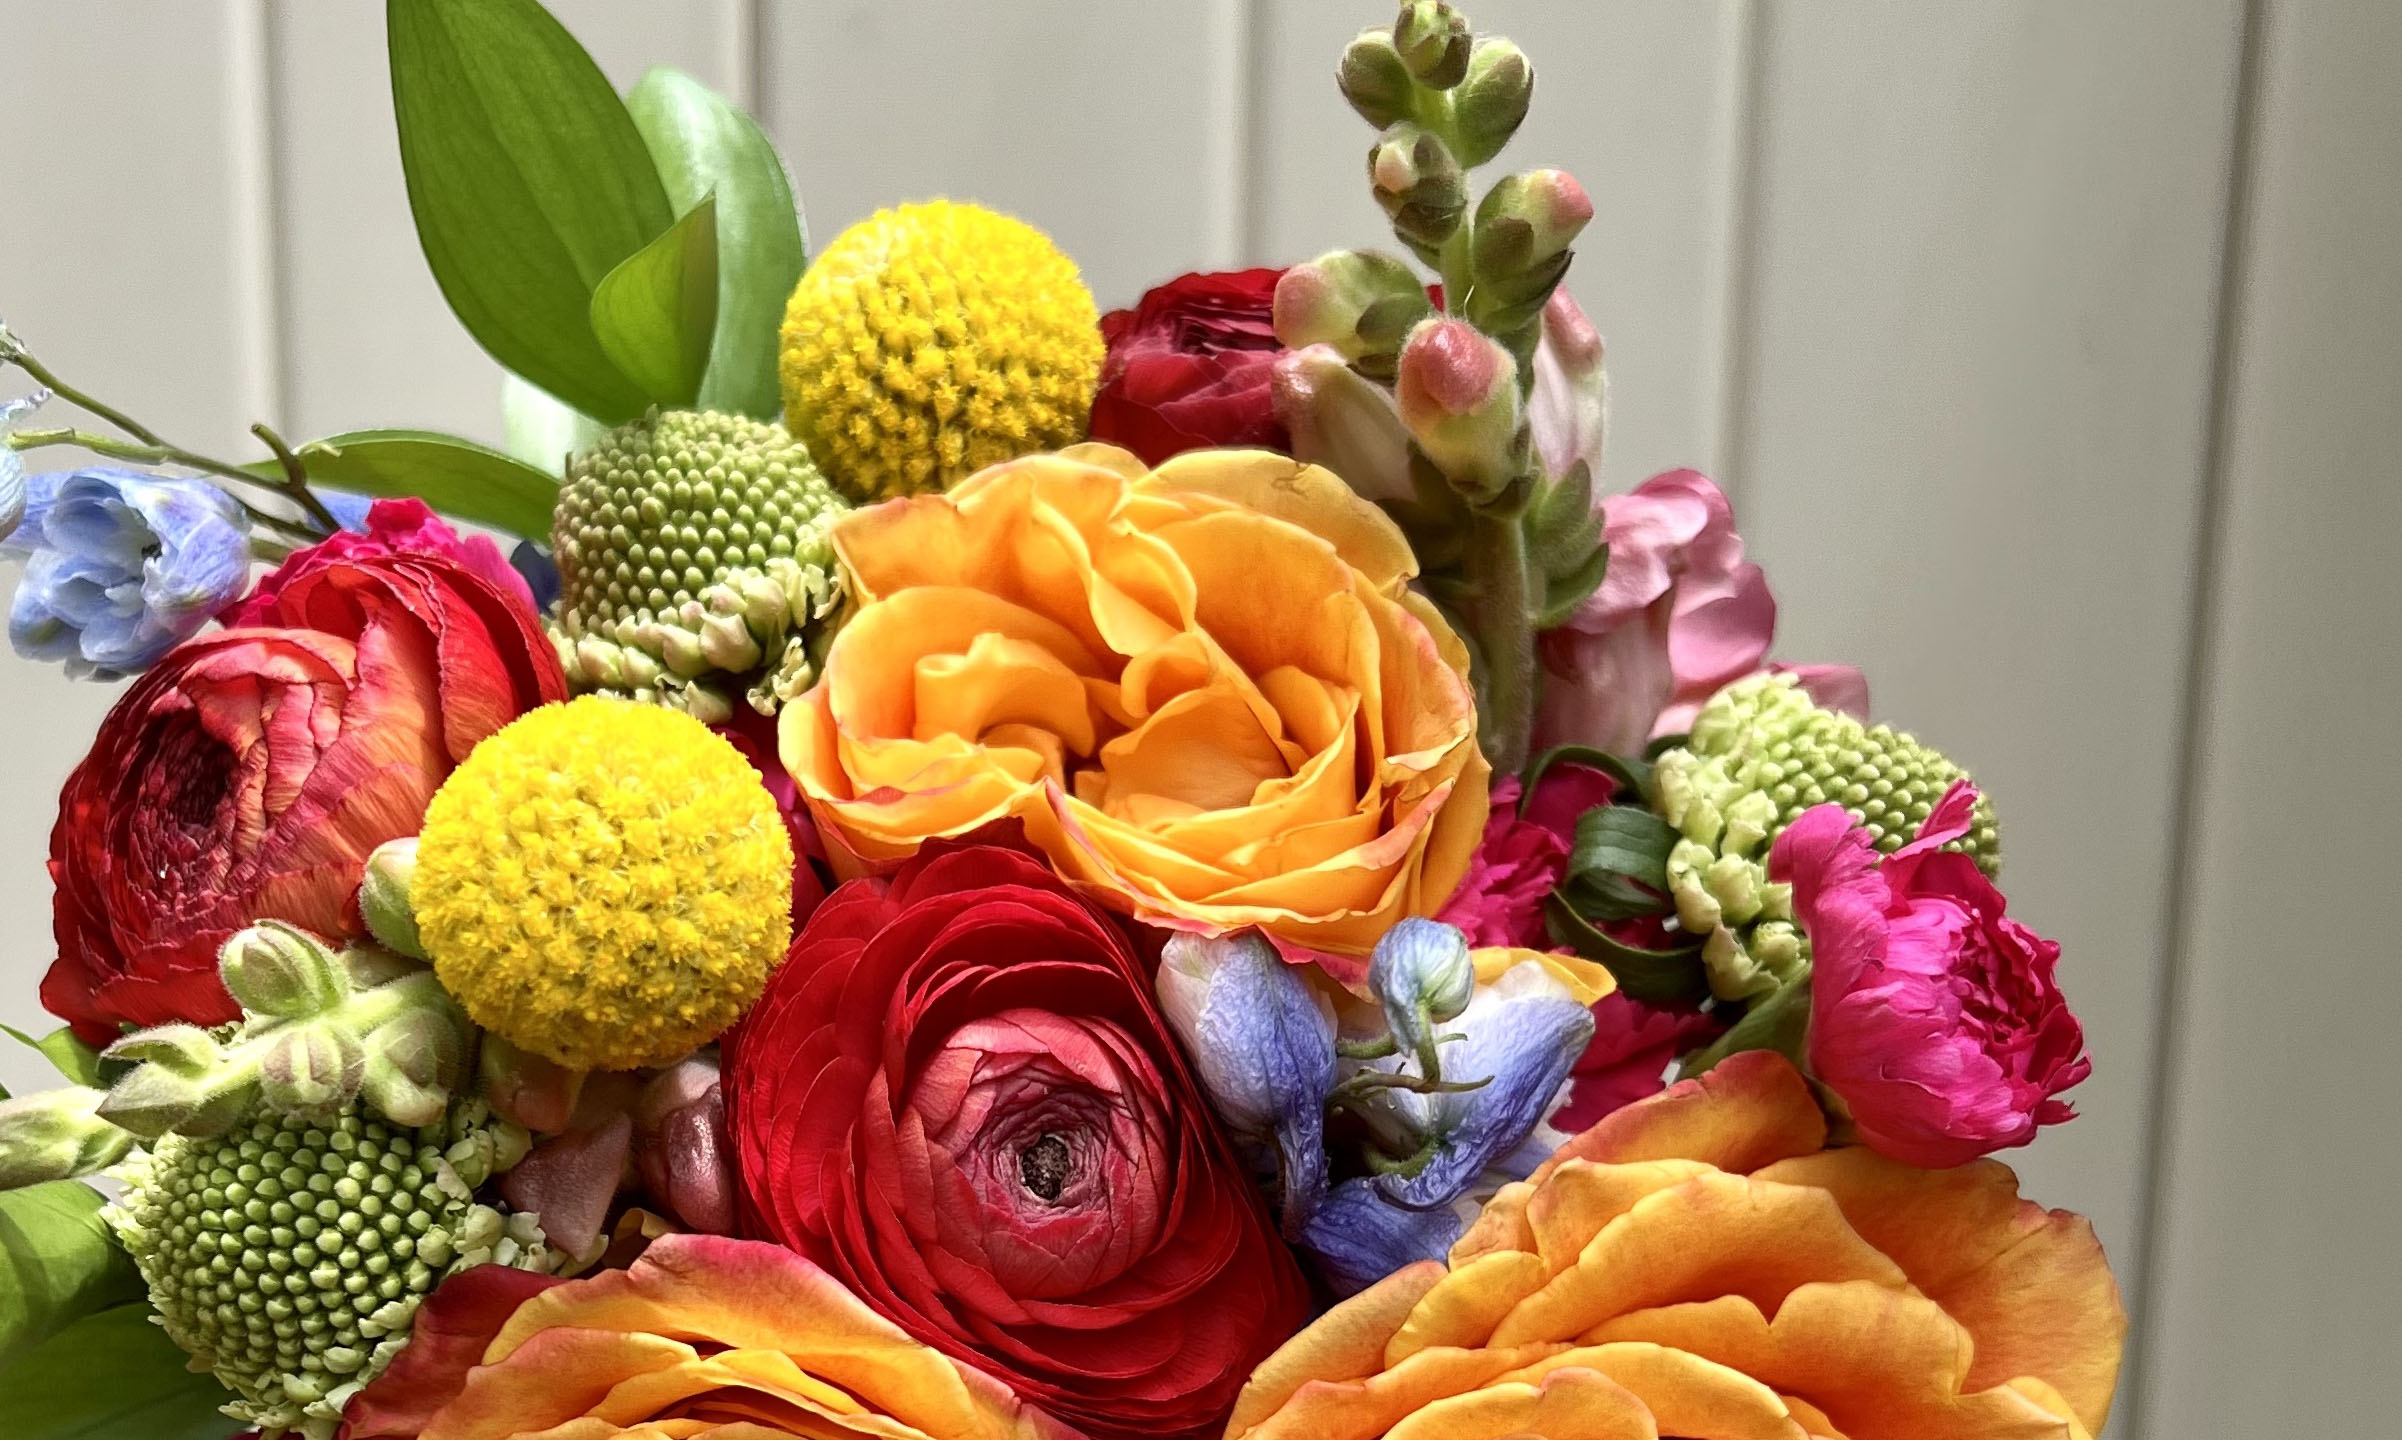 Close up of a colorful flowers for delivery.